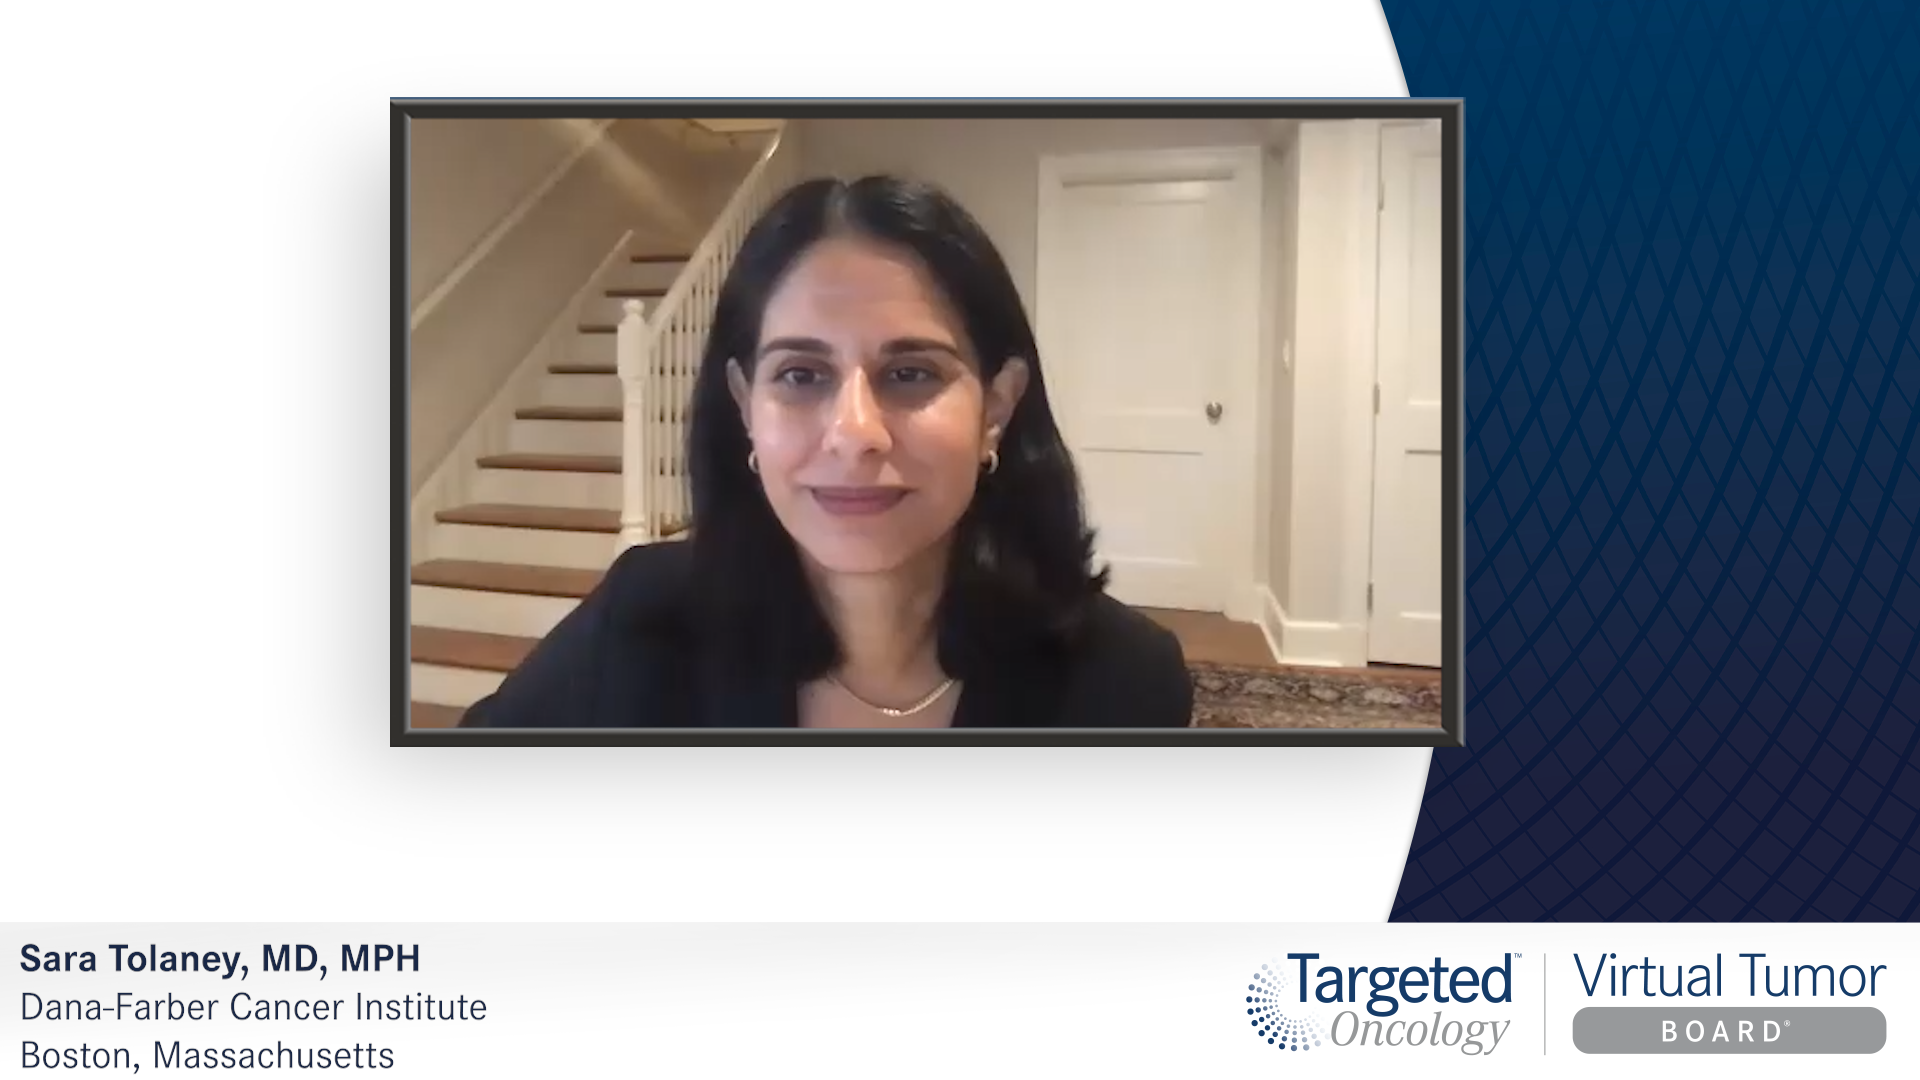 Case 2: Novel Agents in Late-Stage Clinical Trials for HER2+ MBC